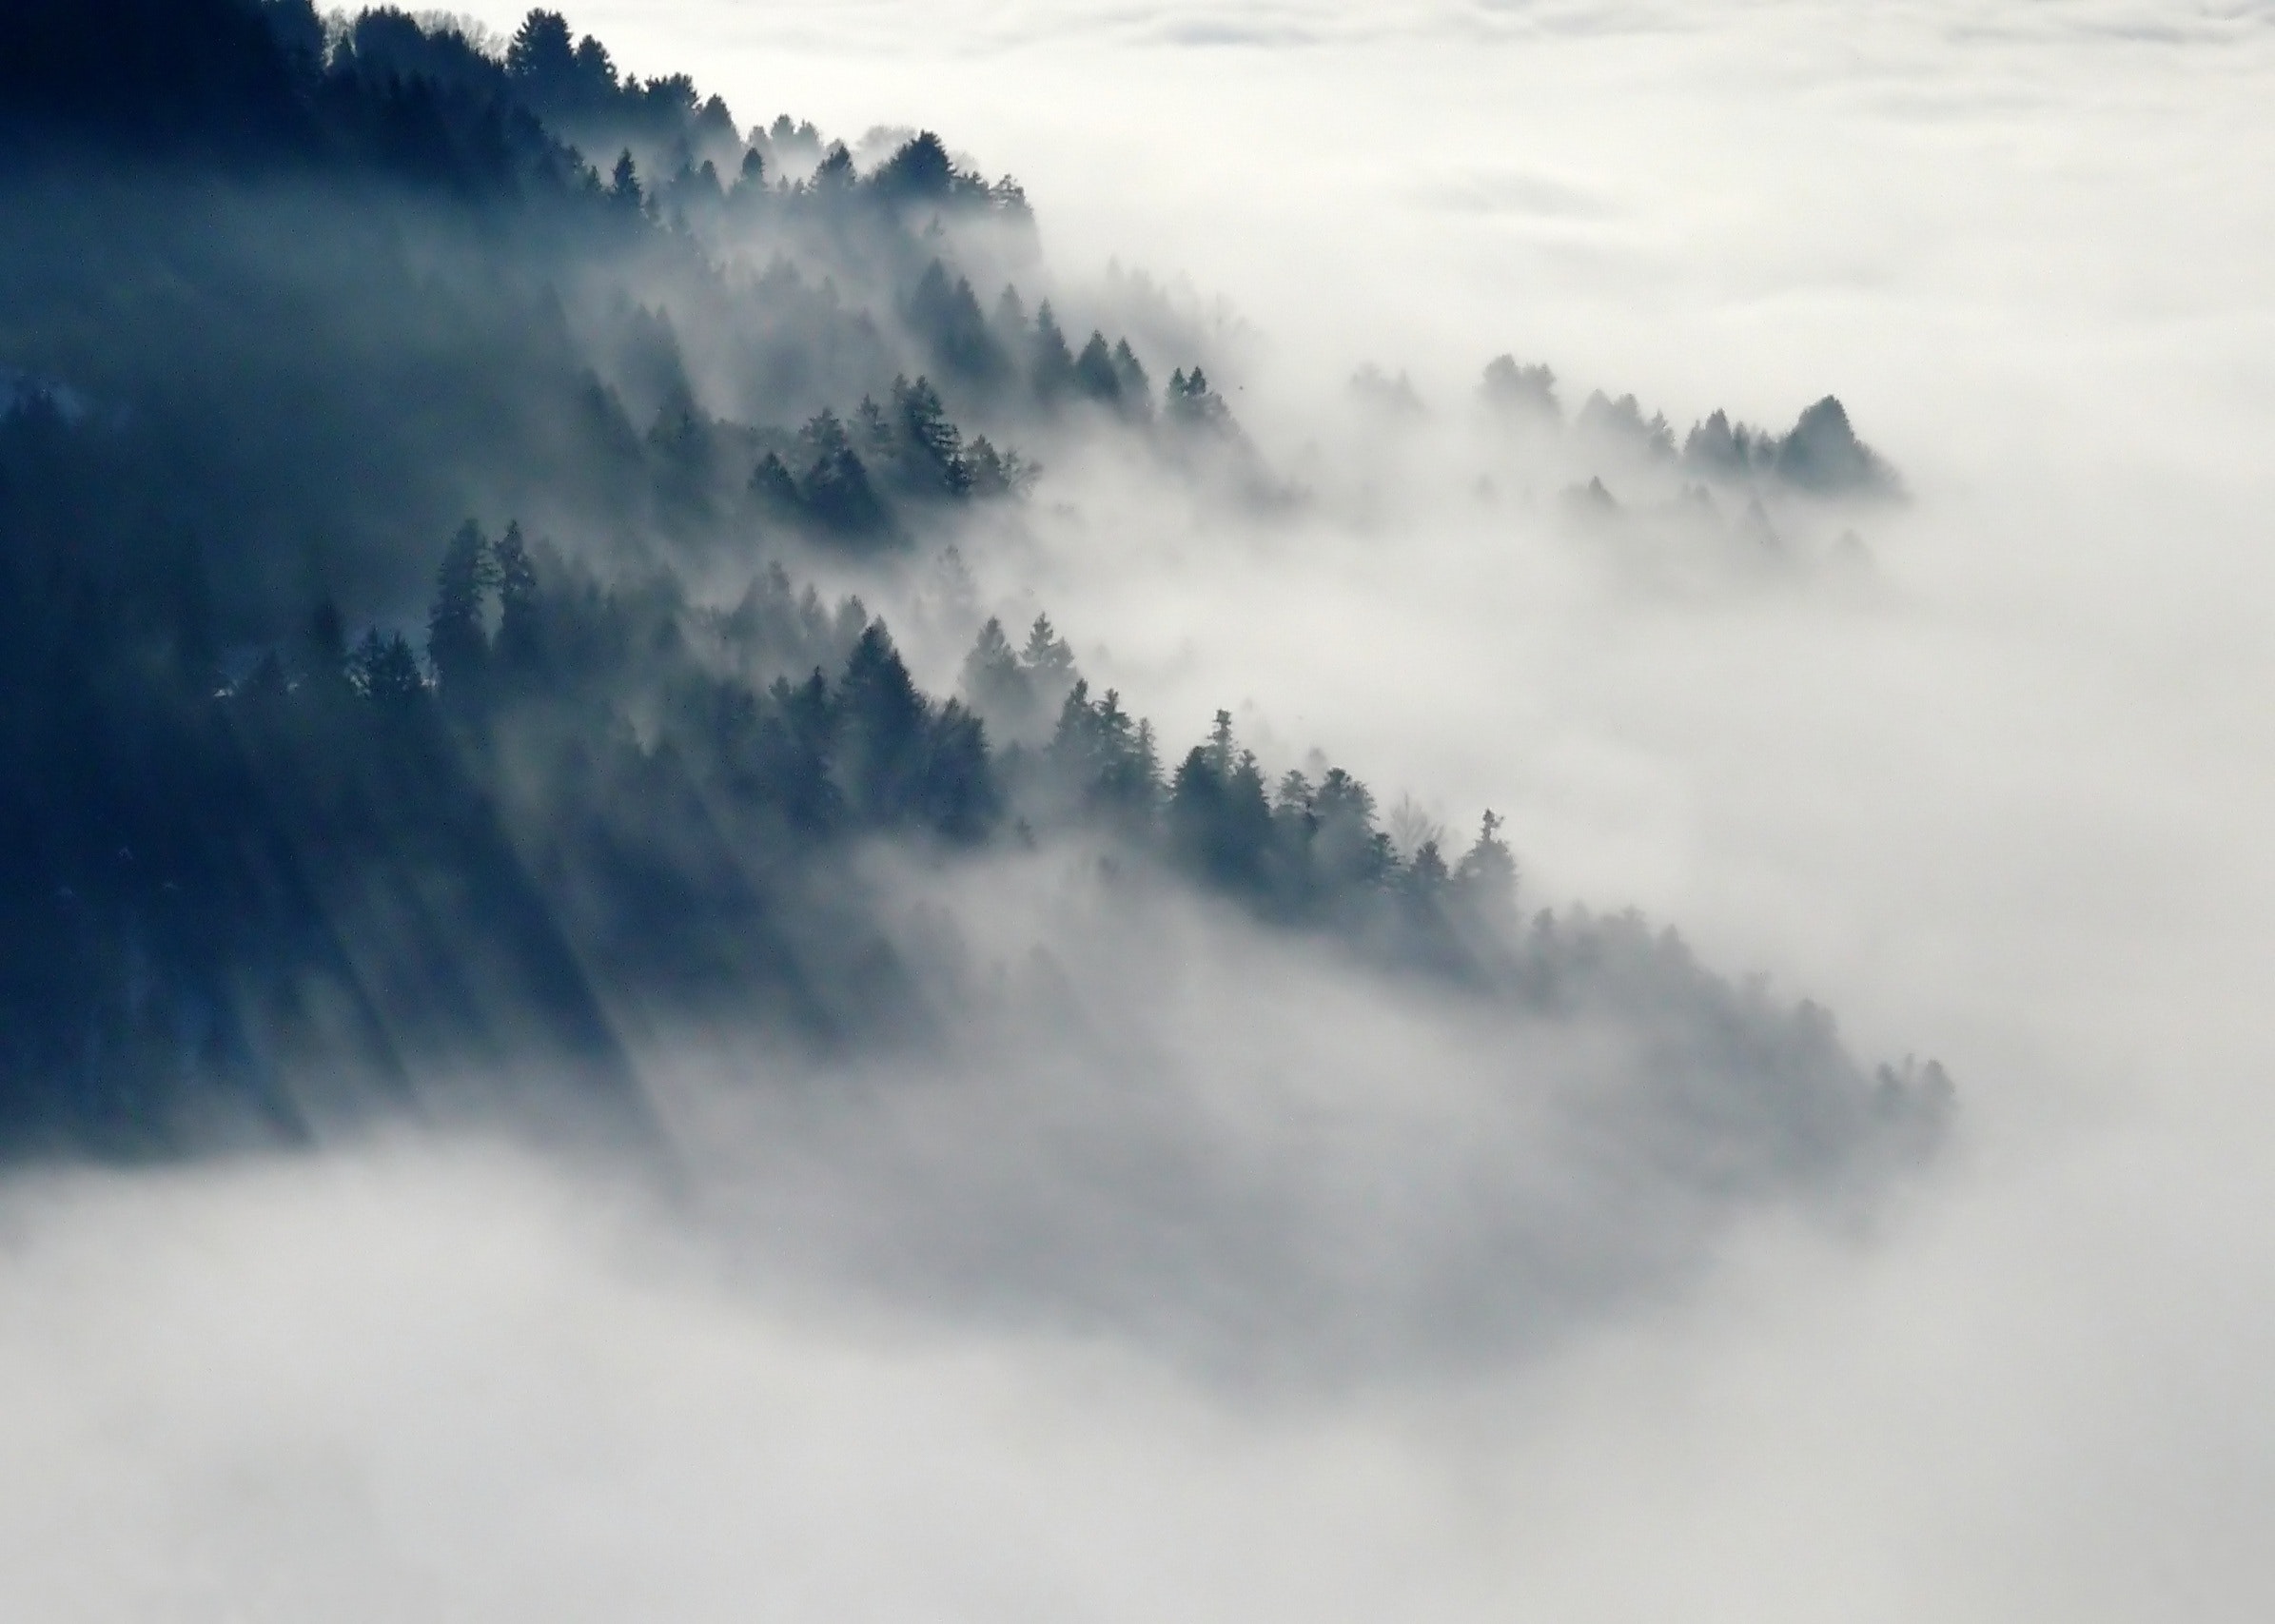 mountain-with-green-leaved-trees-surrounded-by-fog-during-45222.jpg